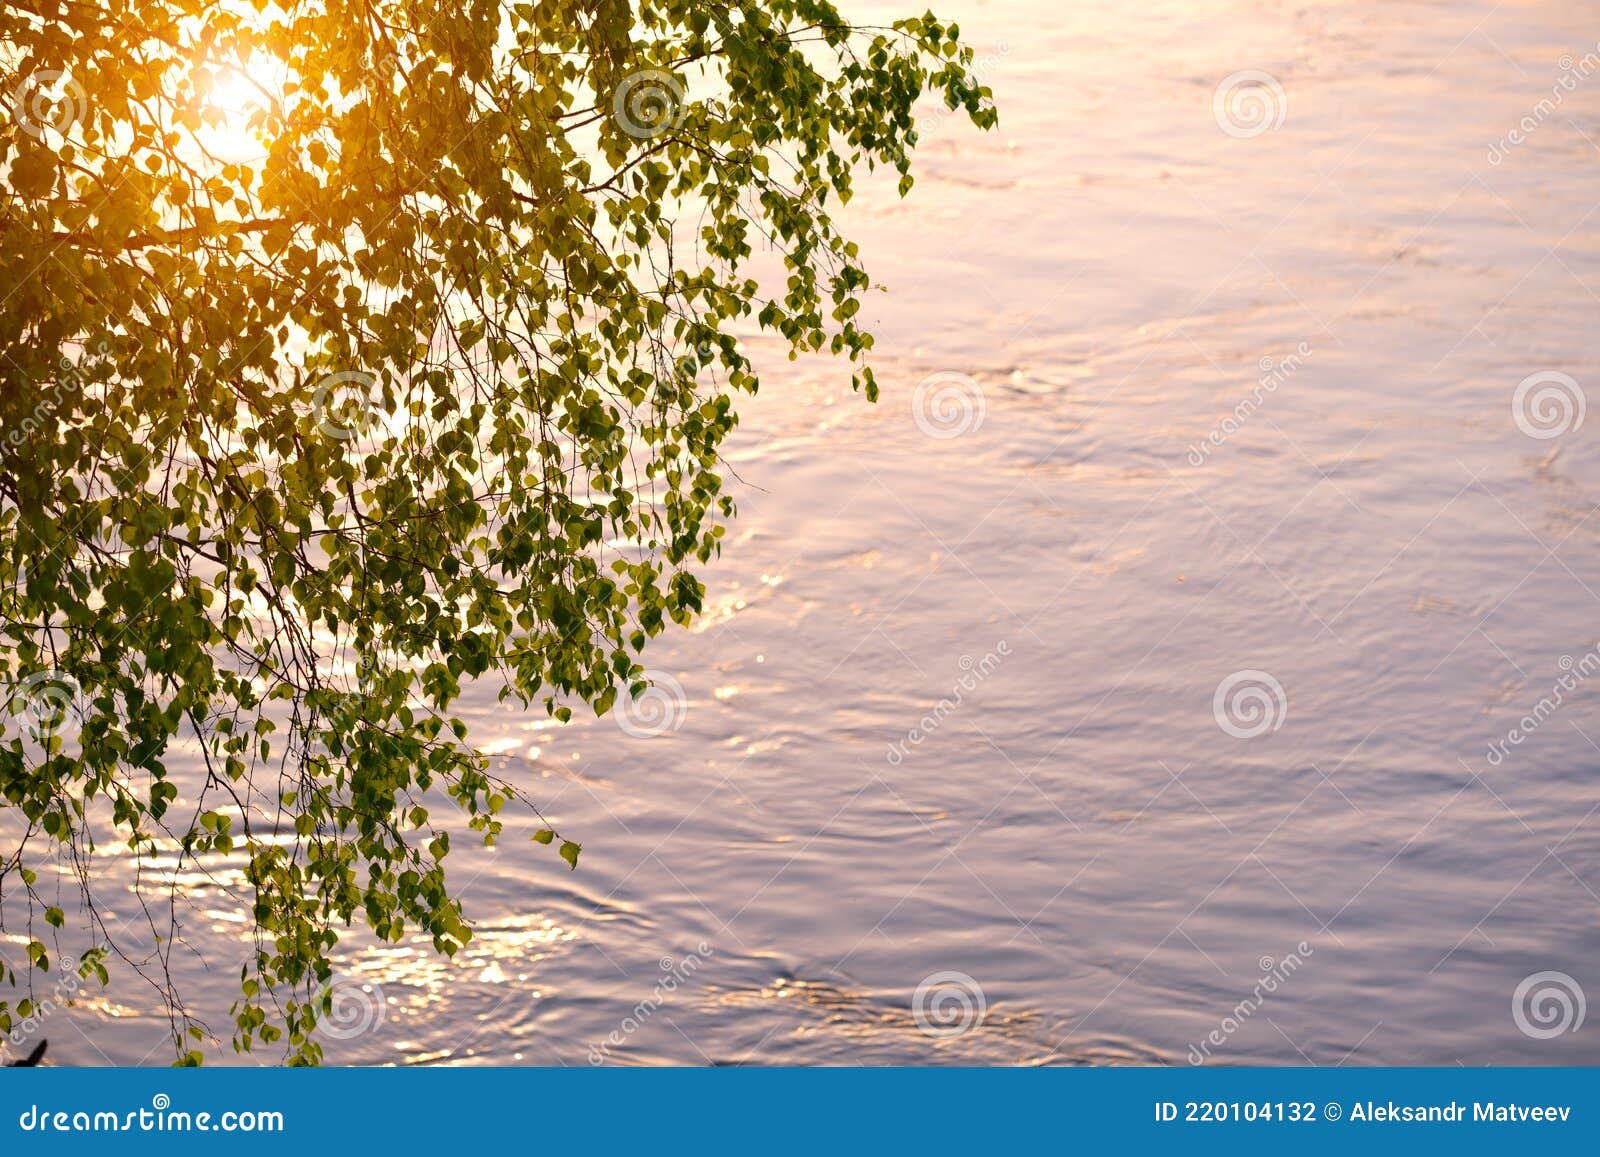 branch of a birch and sun reflected in river water, summer concept background